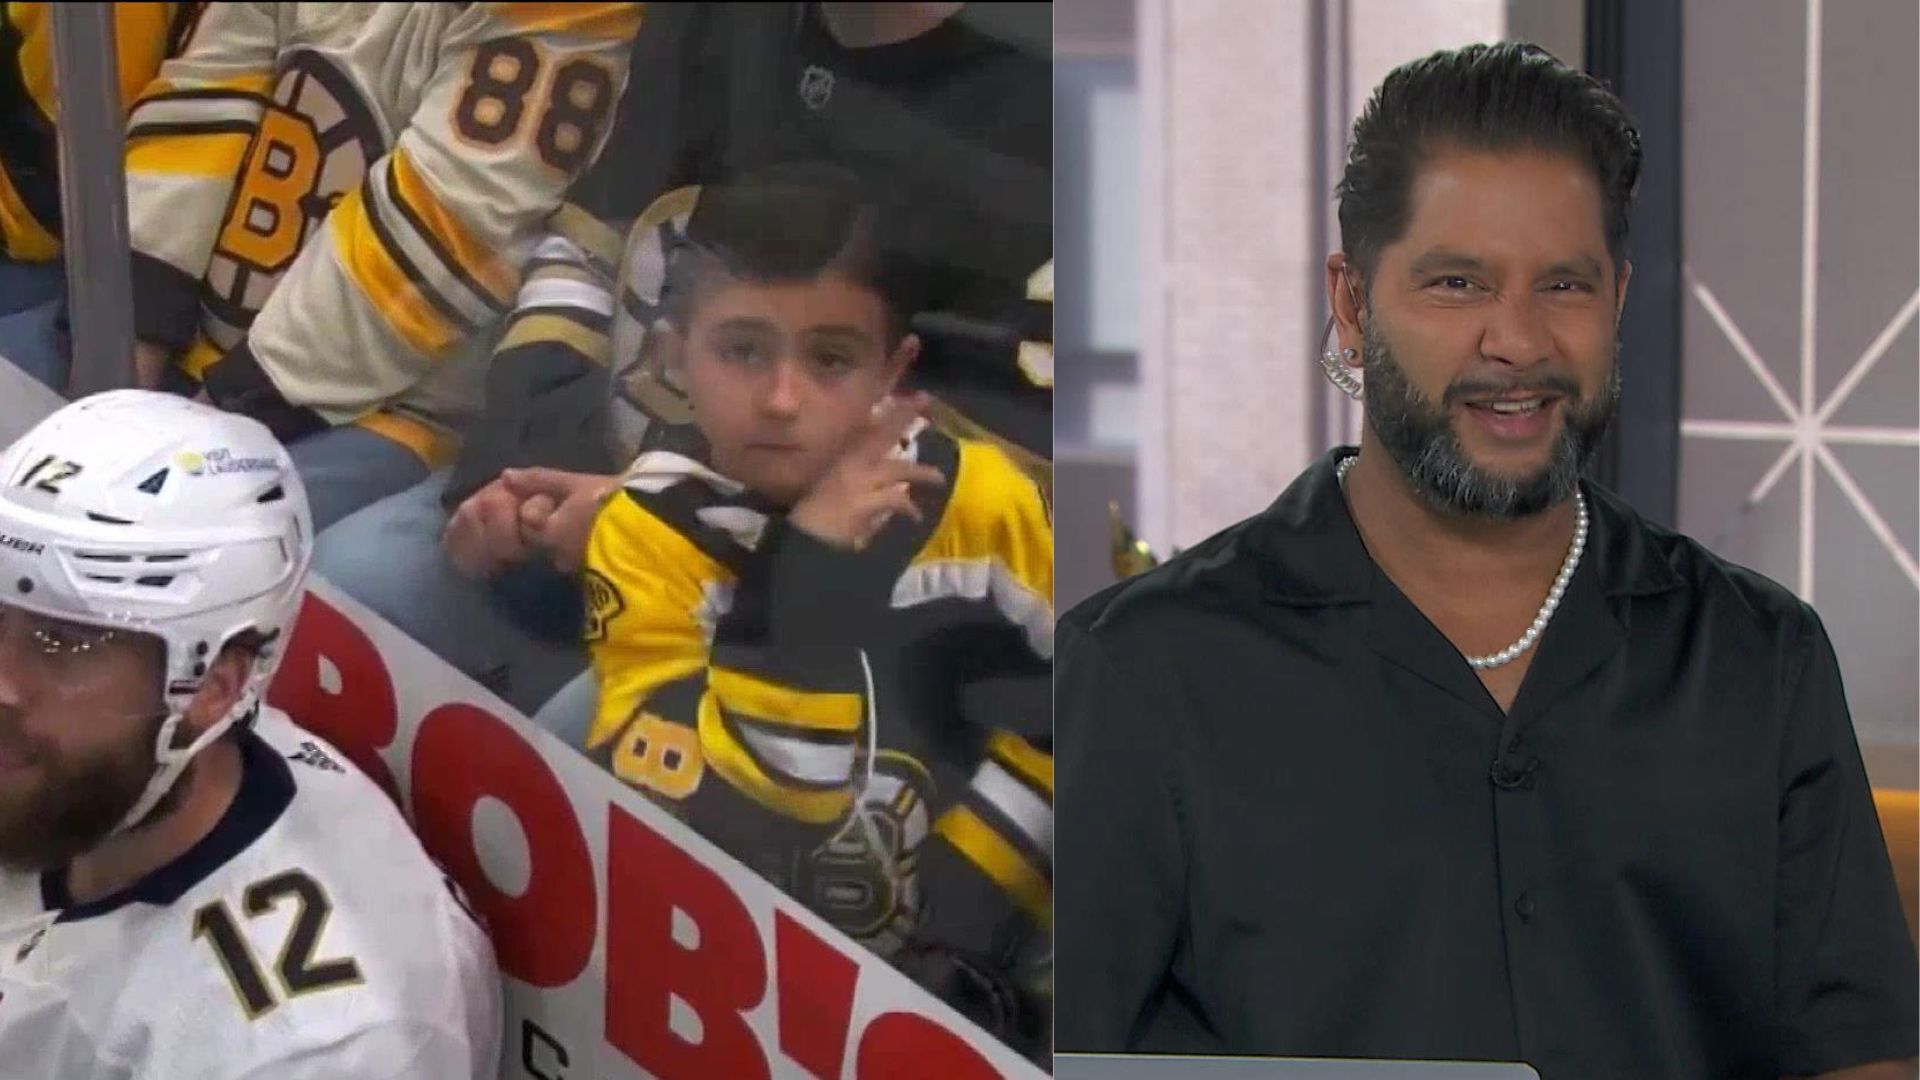 This kid stole the show at the Bruins v. Panthers game